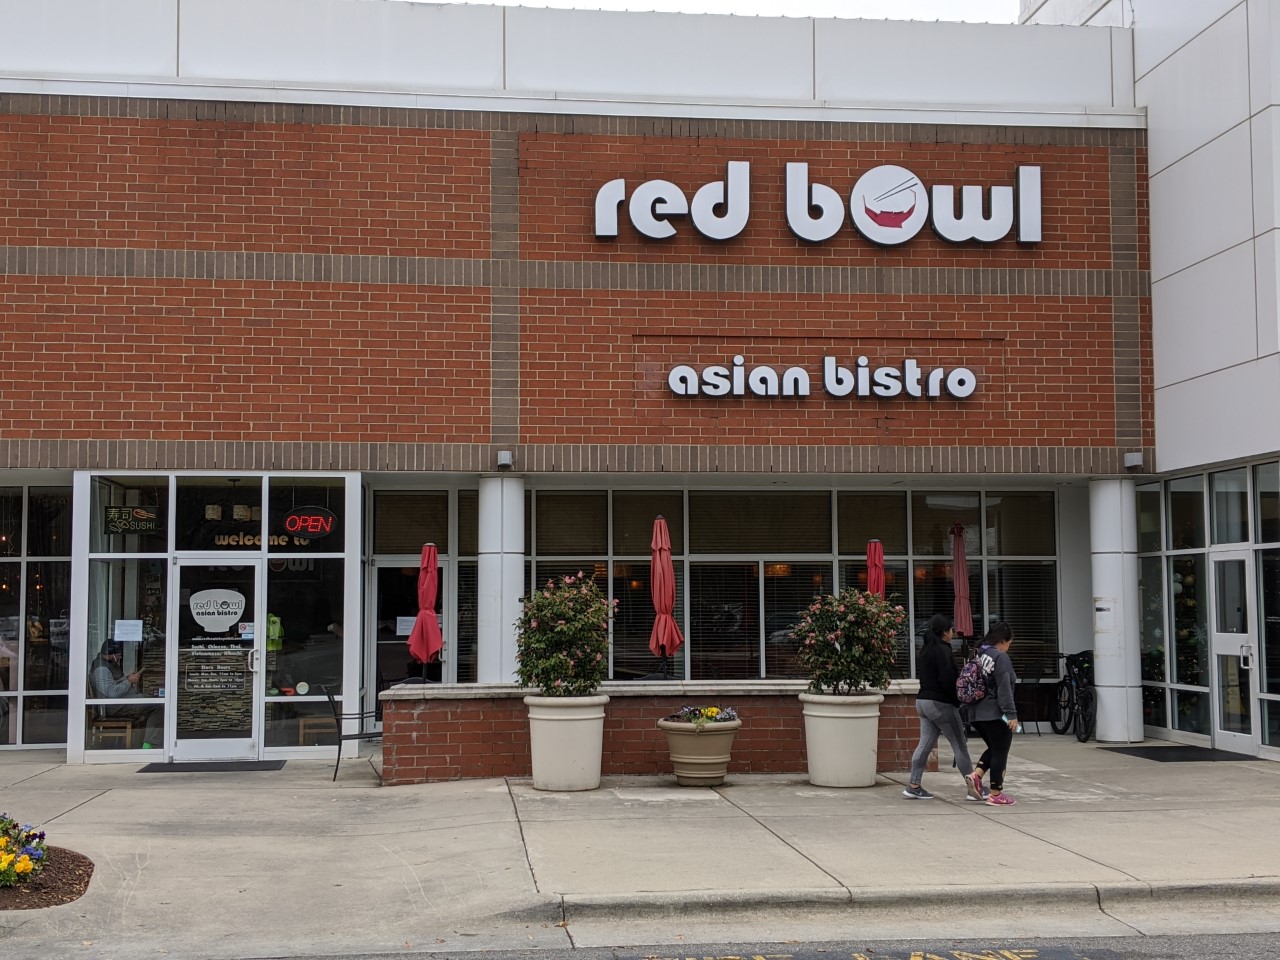 red bowl near me now